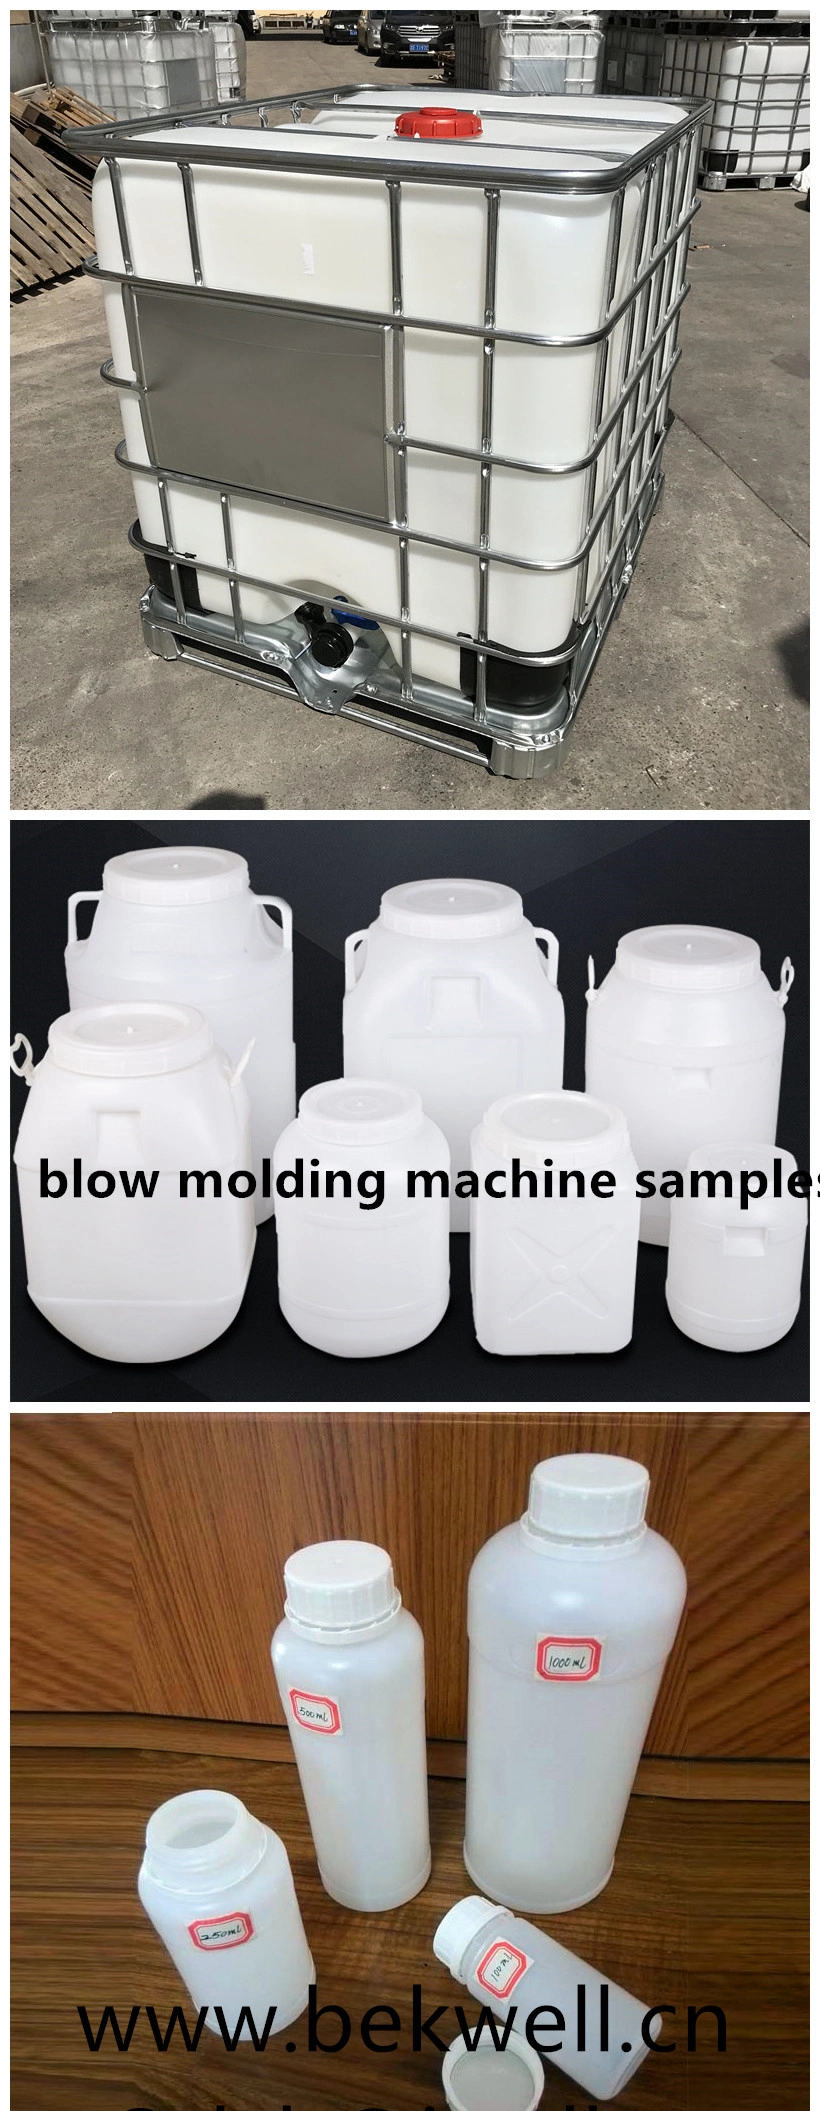 Bekwell HDPE Plastic Blowing Molding Pallets Making Blow Molding Machine